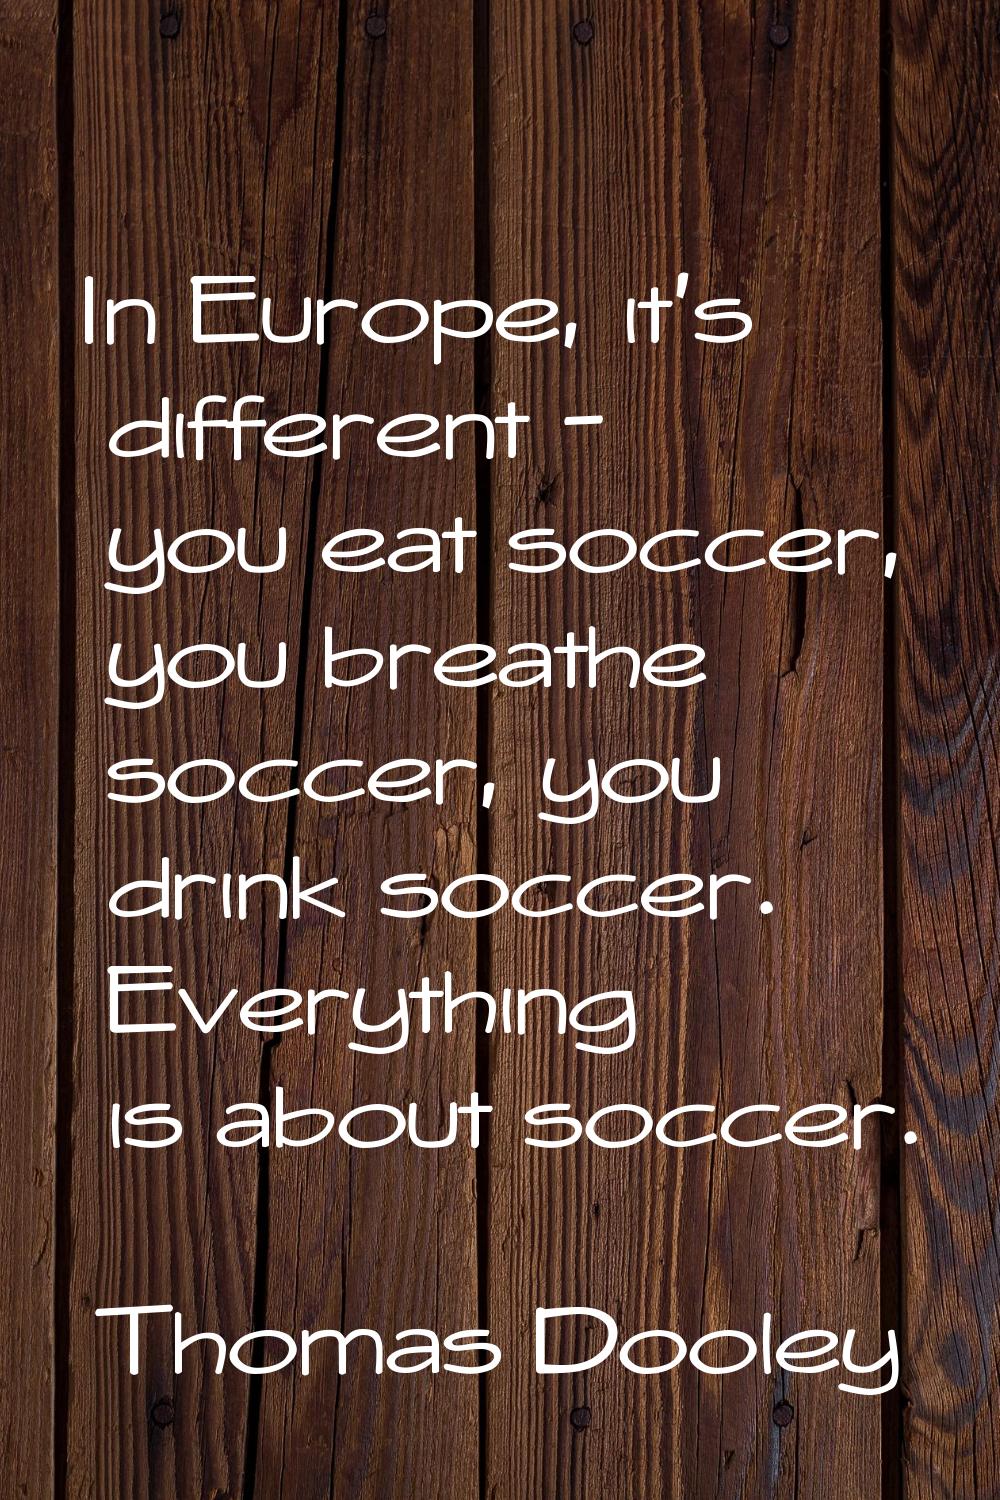 In Europe, it's different - you eat soccer, you breathe soccer, you drink soccer. Everything is abo